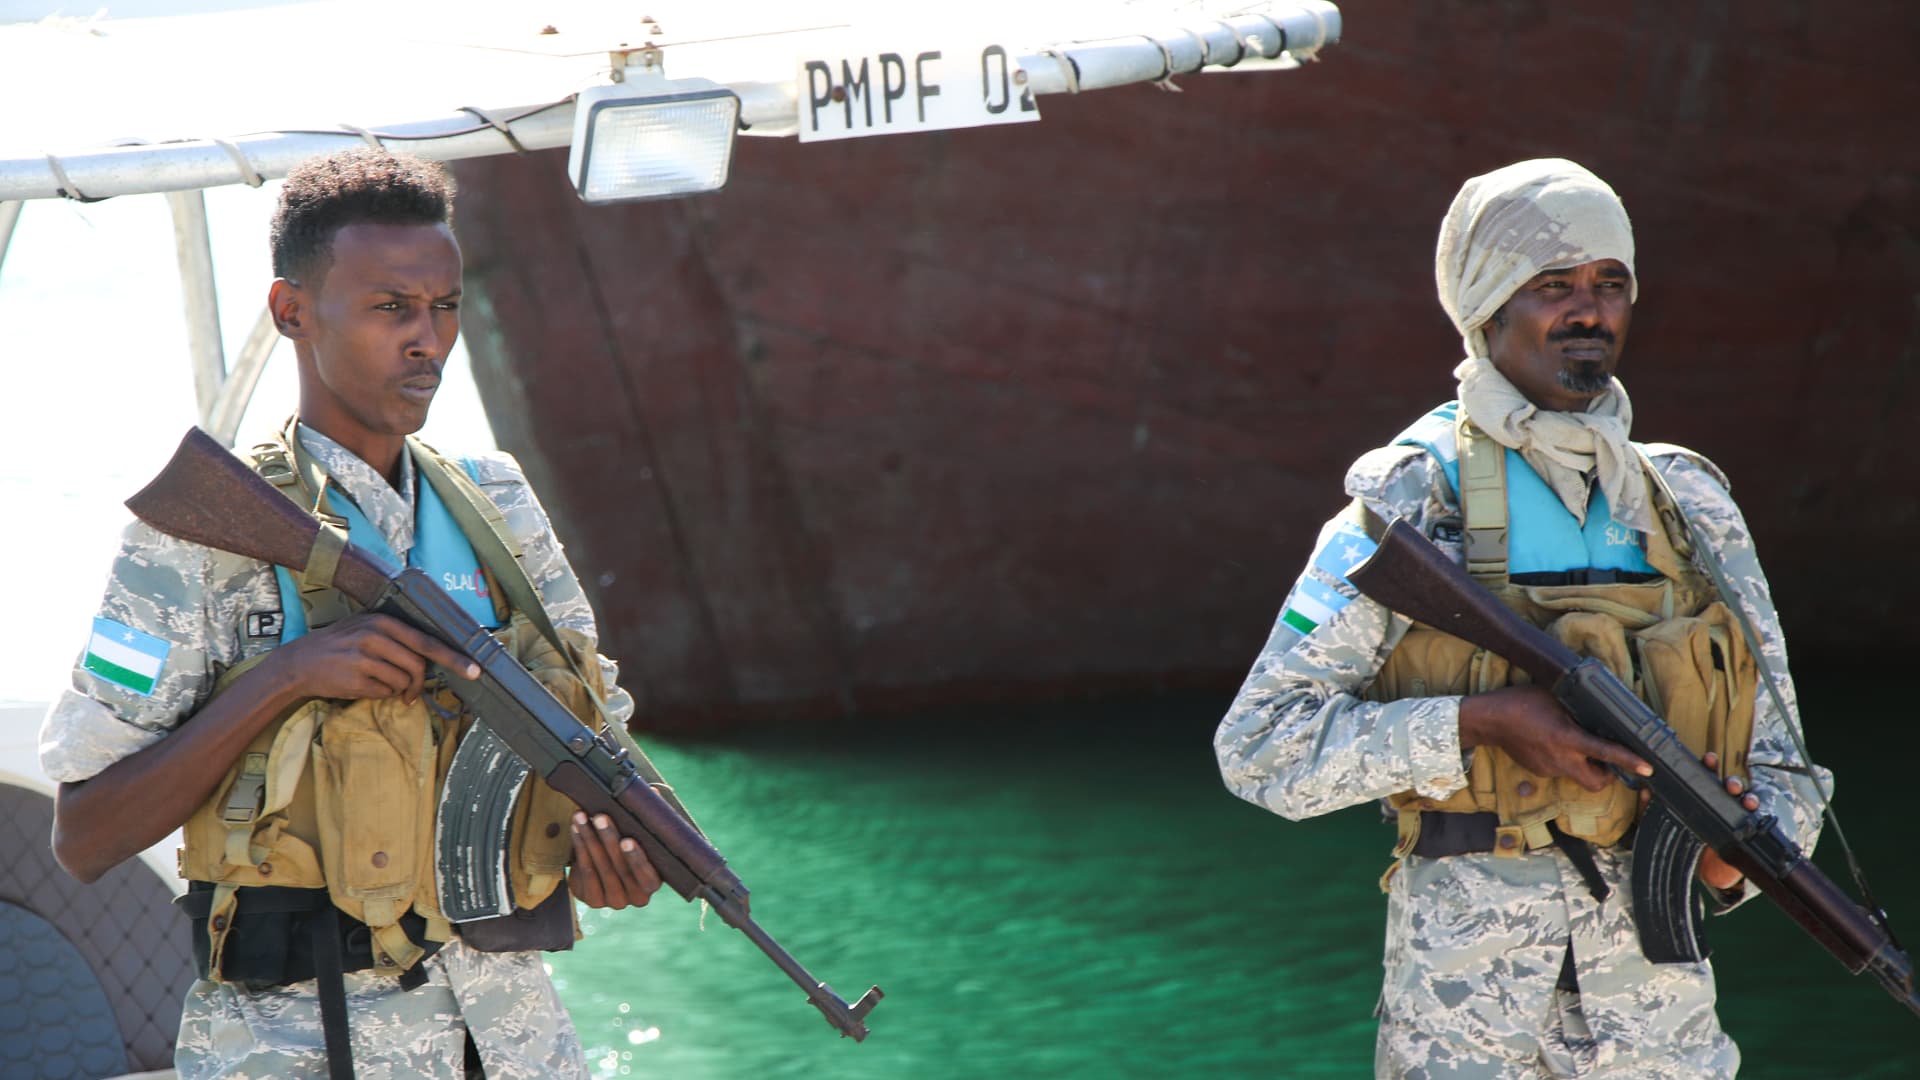 Somali pirates are back on the attack at a level not seen in years, adding to global shipping threats